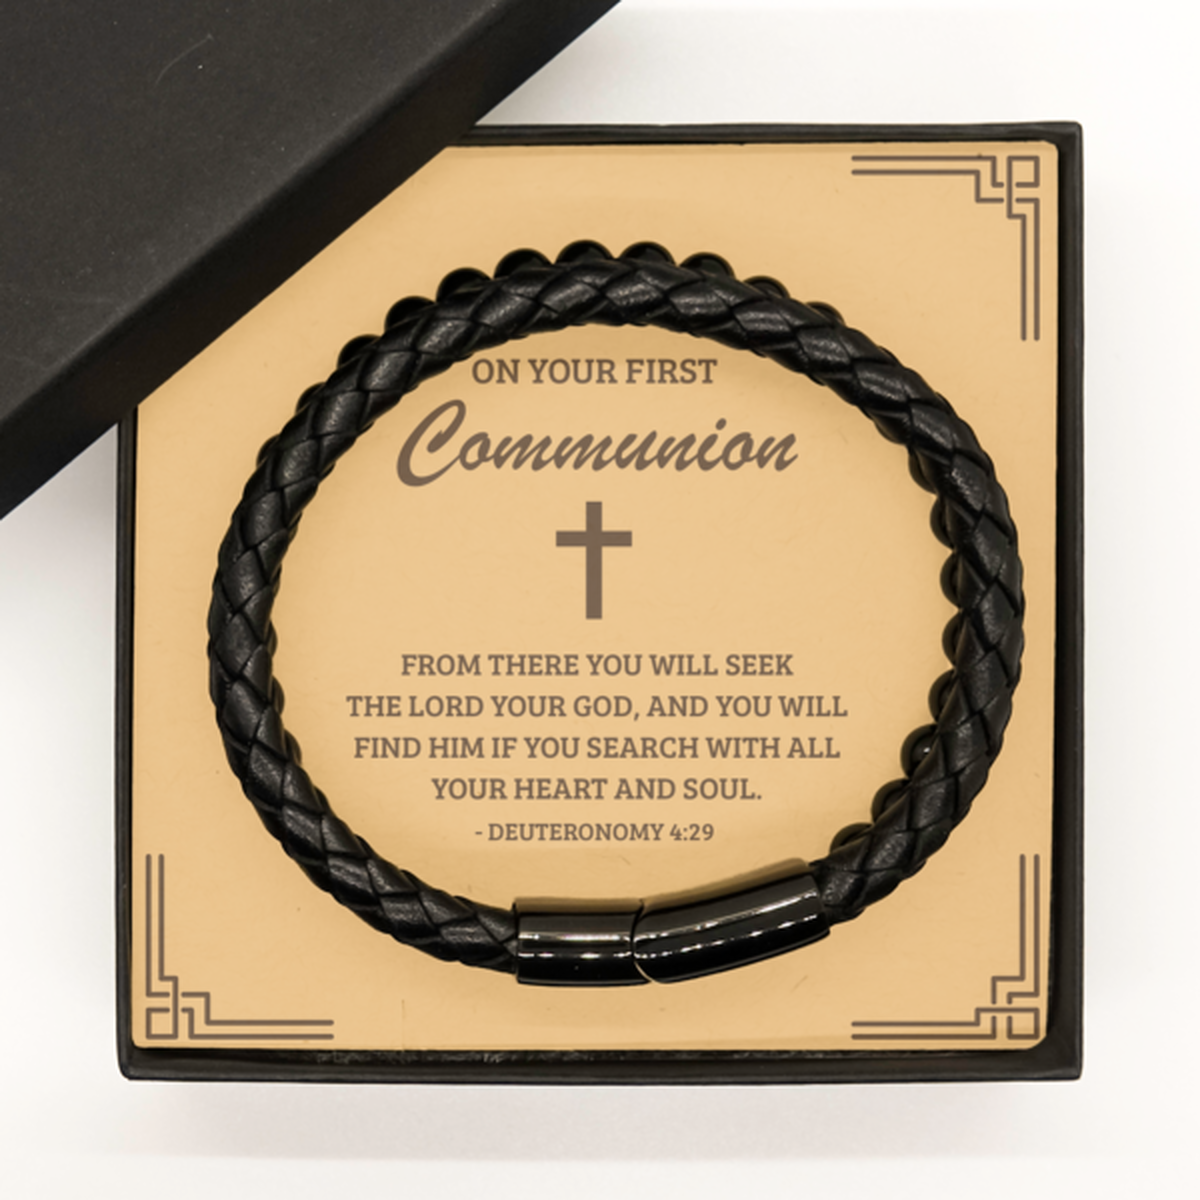 First Communion Gifts for Teenage Boys, From there you will seek the Lord your God, Stone Leather Bracelet with Bible Verse Message Card, Religious Catholic Bracelet for Son, Grandson, Dad, Godfather